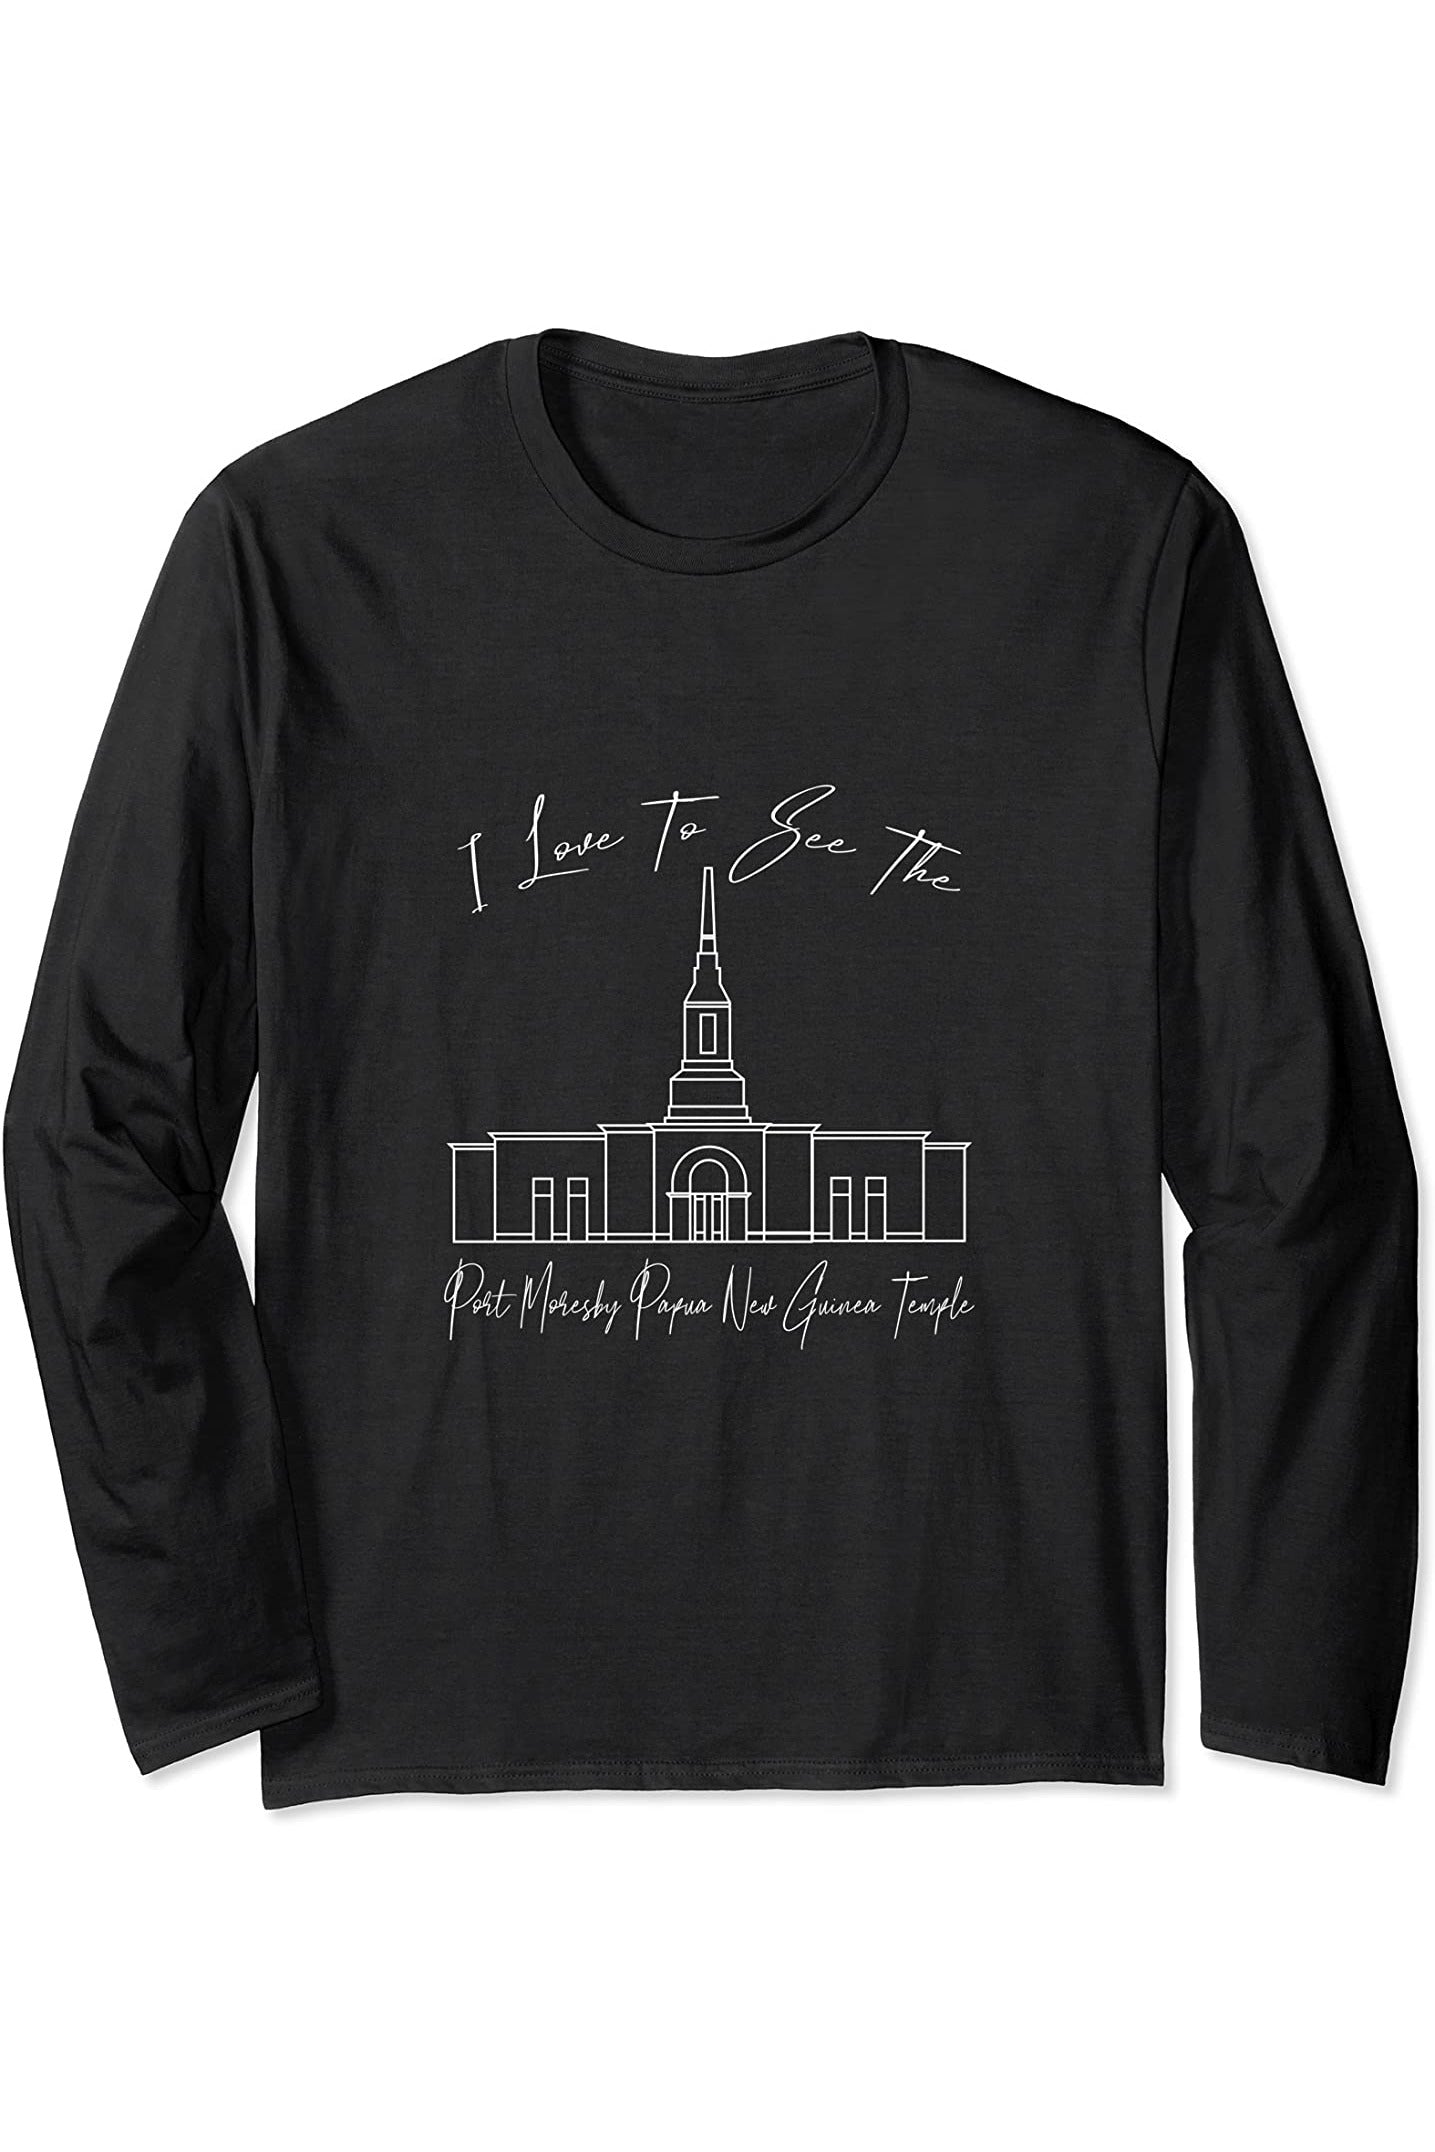 Port Moresby Papua New Guinea Temple Long Sleeve T-Shirt - Calligraphy Style (English) US